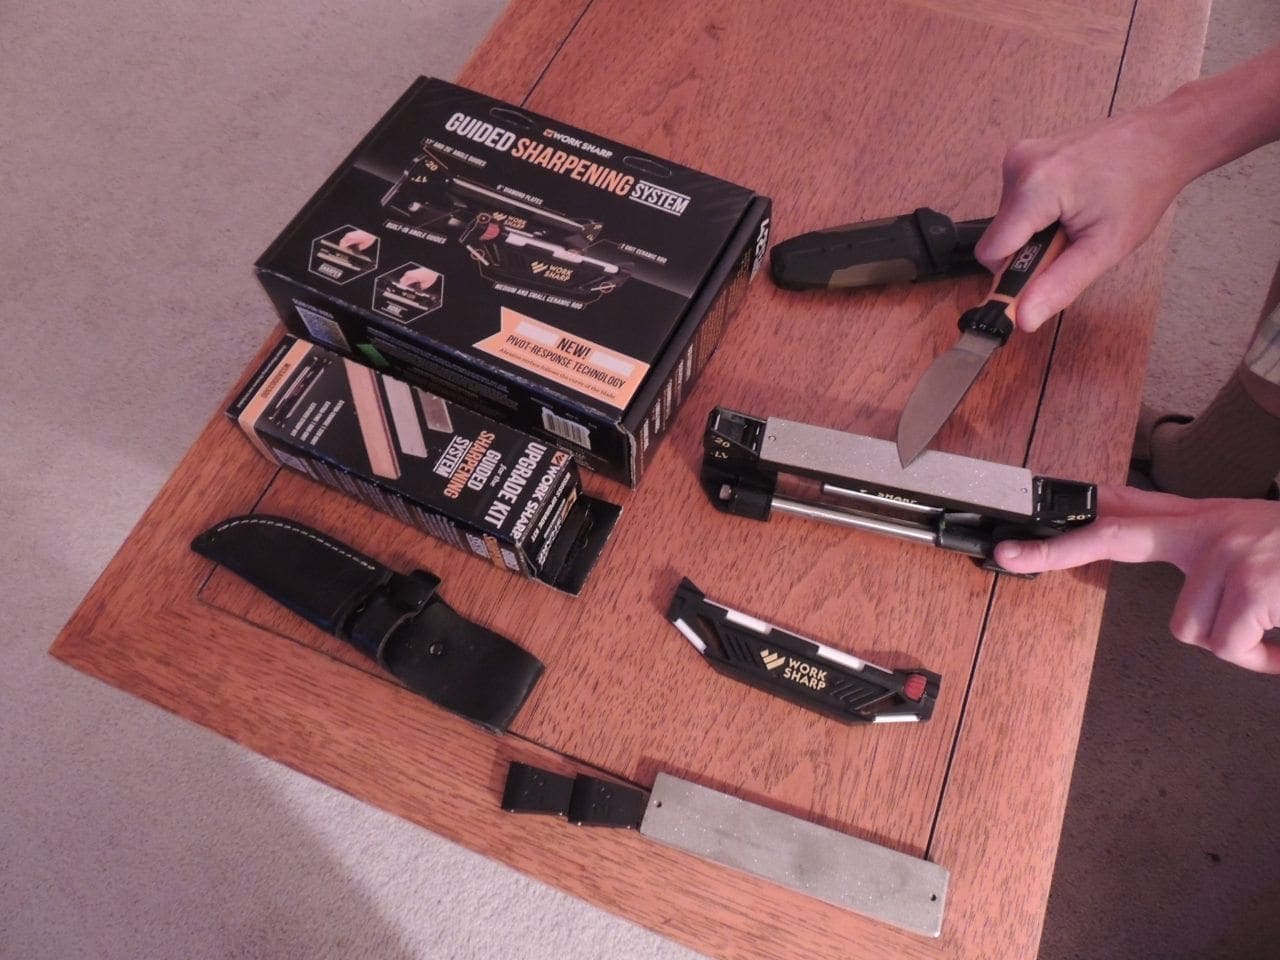 Work Sharp Guided Sharpening System Review